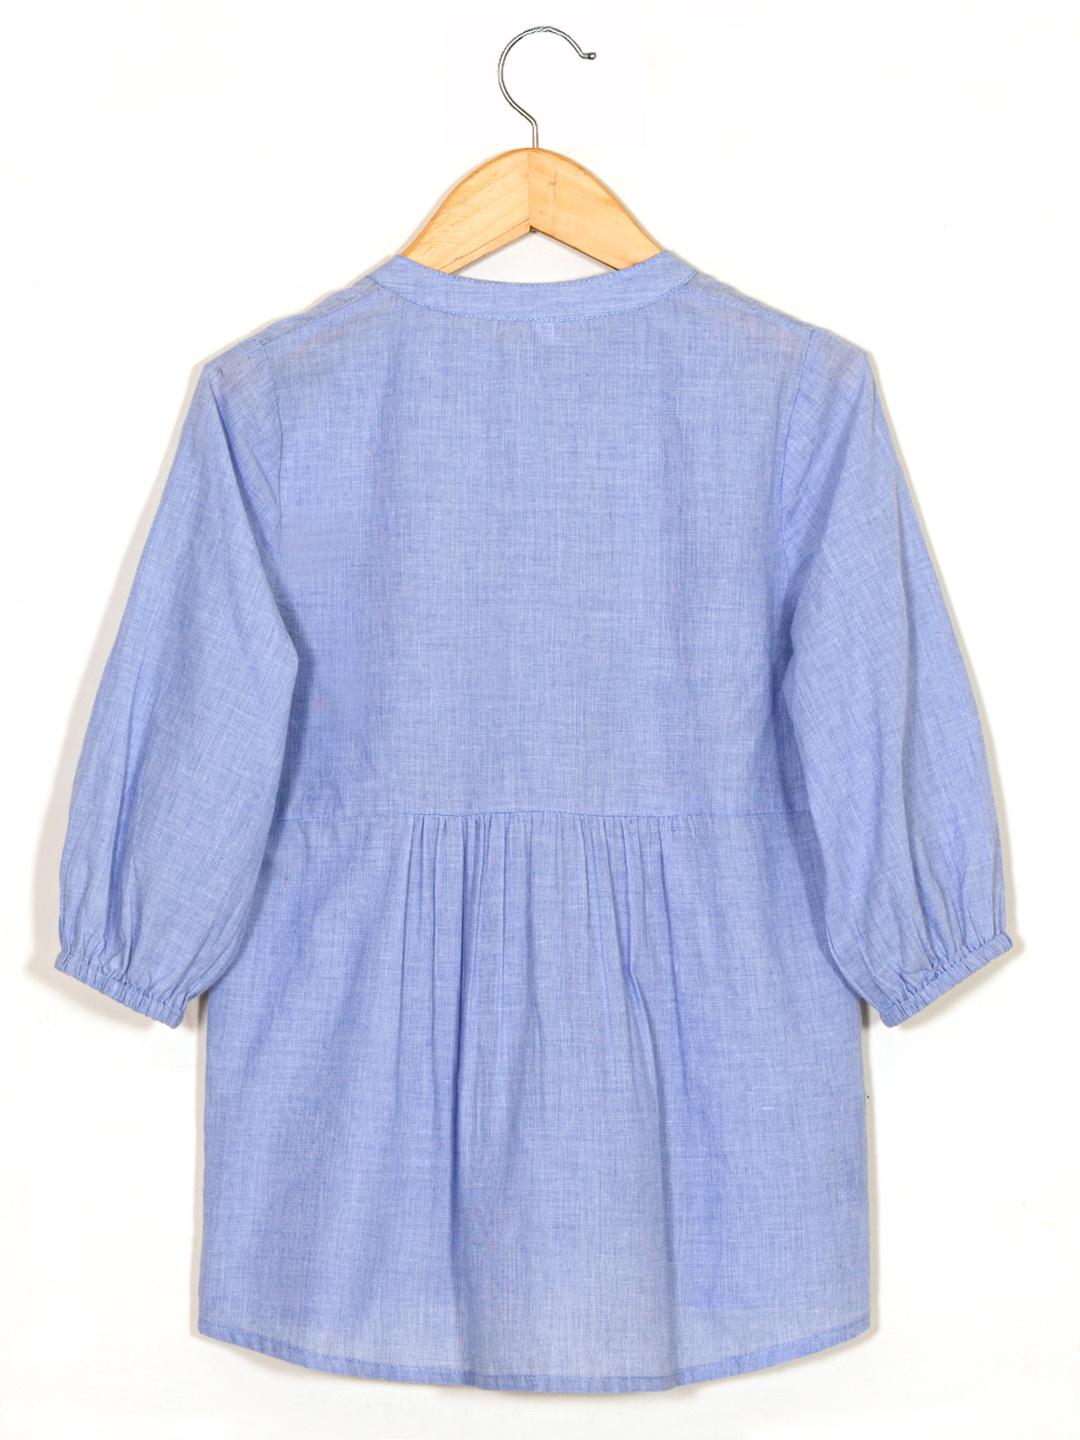 Cotton Chambray Embroidered Top